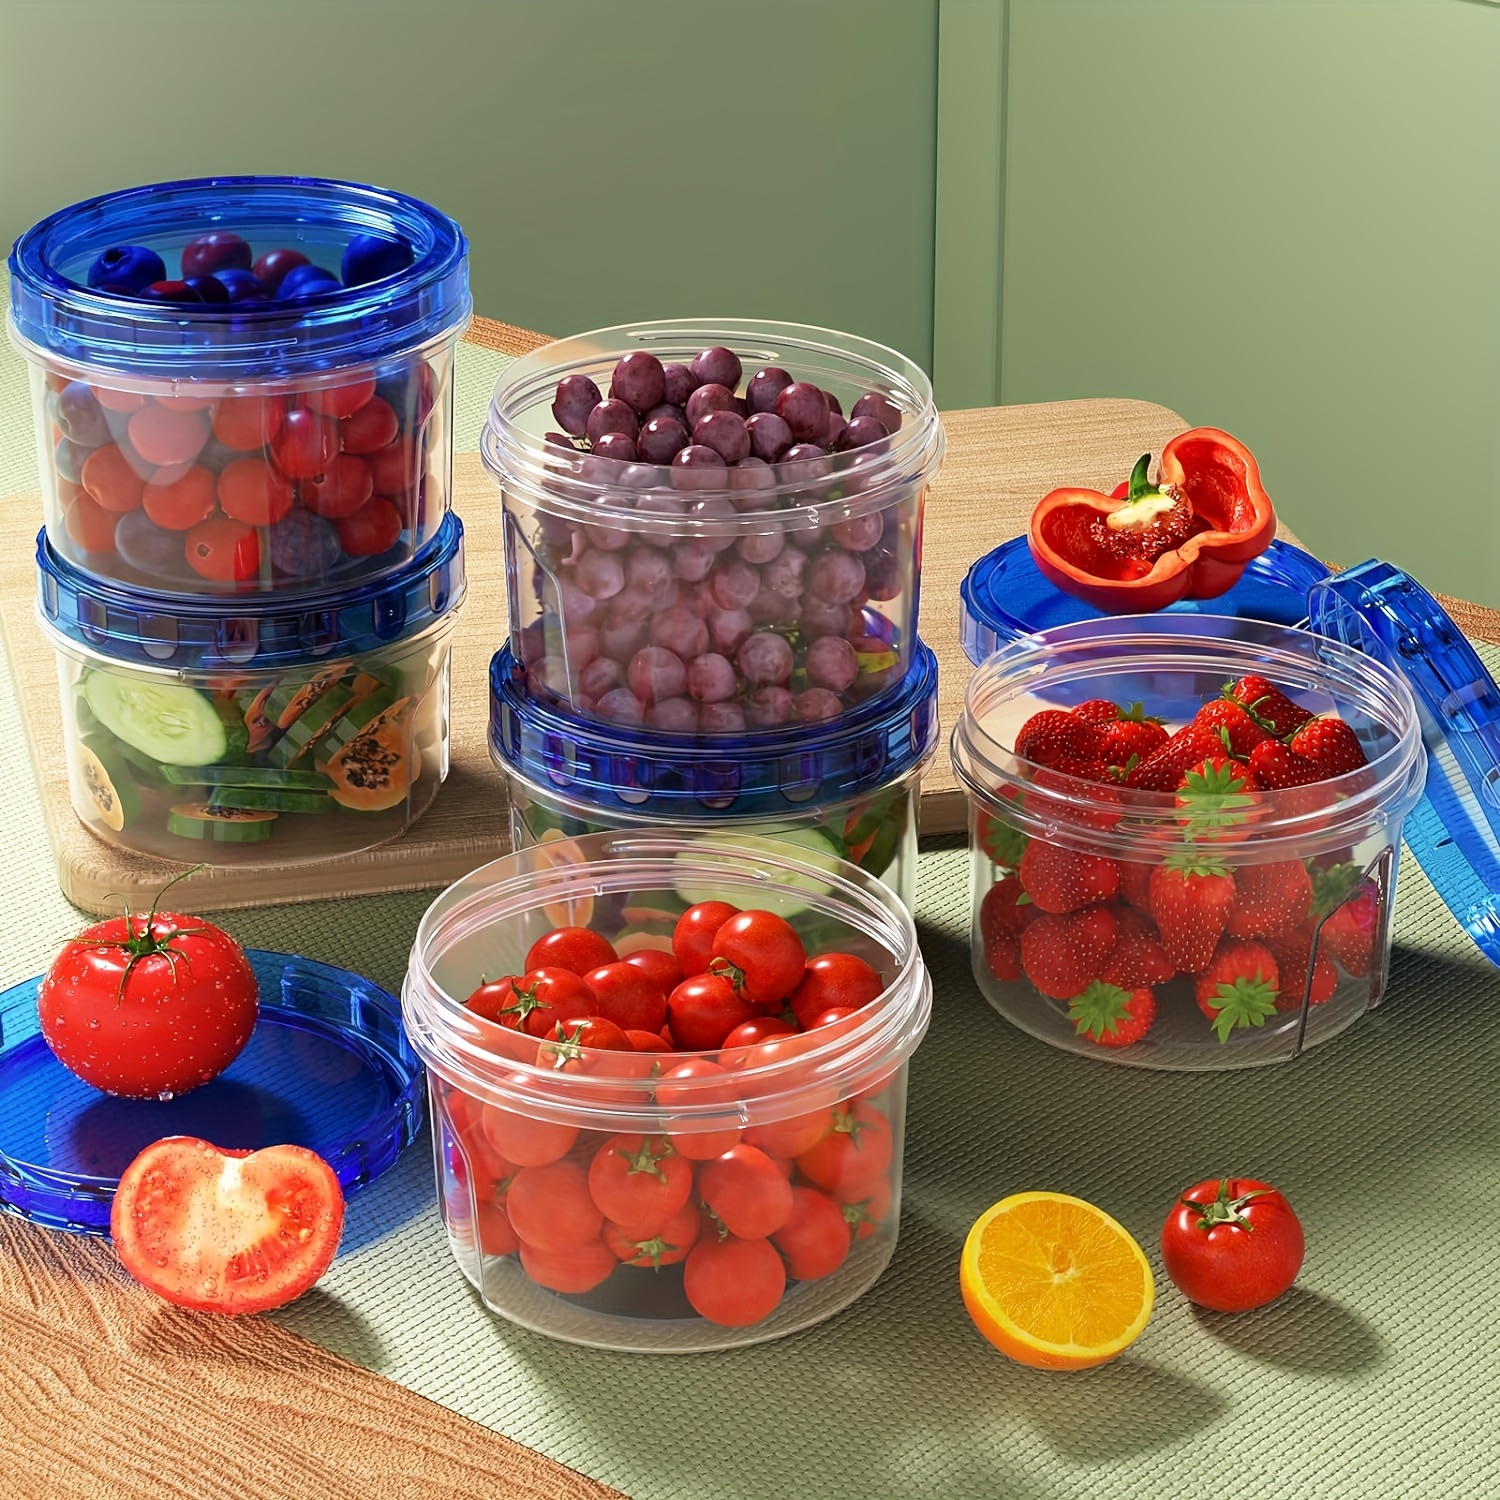 

6-pack Airtight Food Storage Containers With Twist Top Lids - Bpa Free, Leakproof, Stackable, Microwave/dishwasher Safe, Can Be Used For Food Contact - 500ml/16 Oz Meal Prep & Freezer Storage Bins